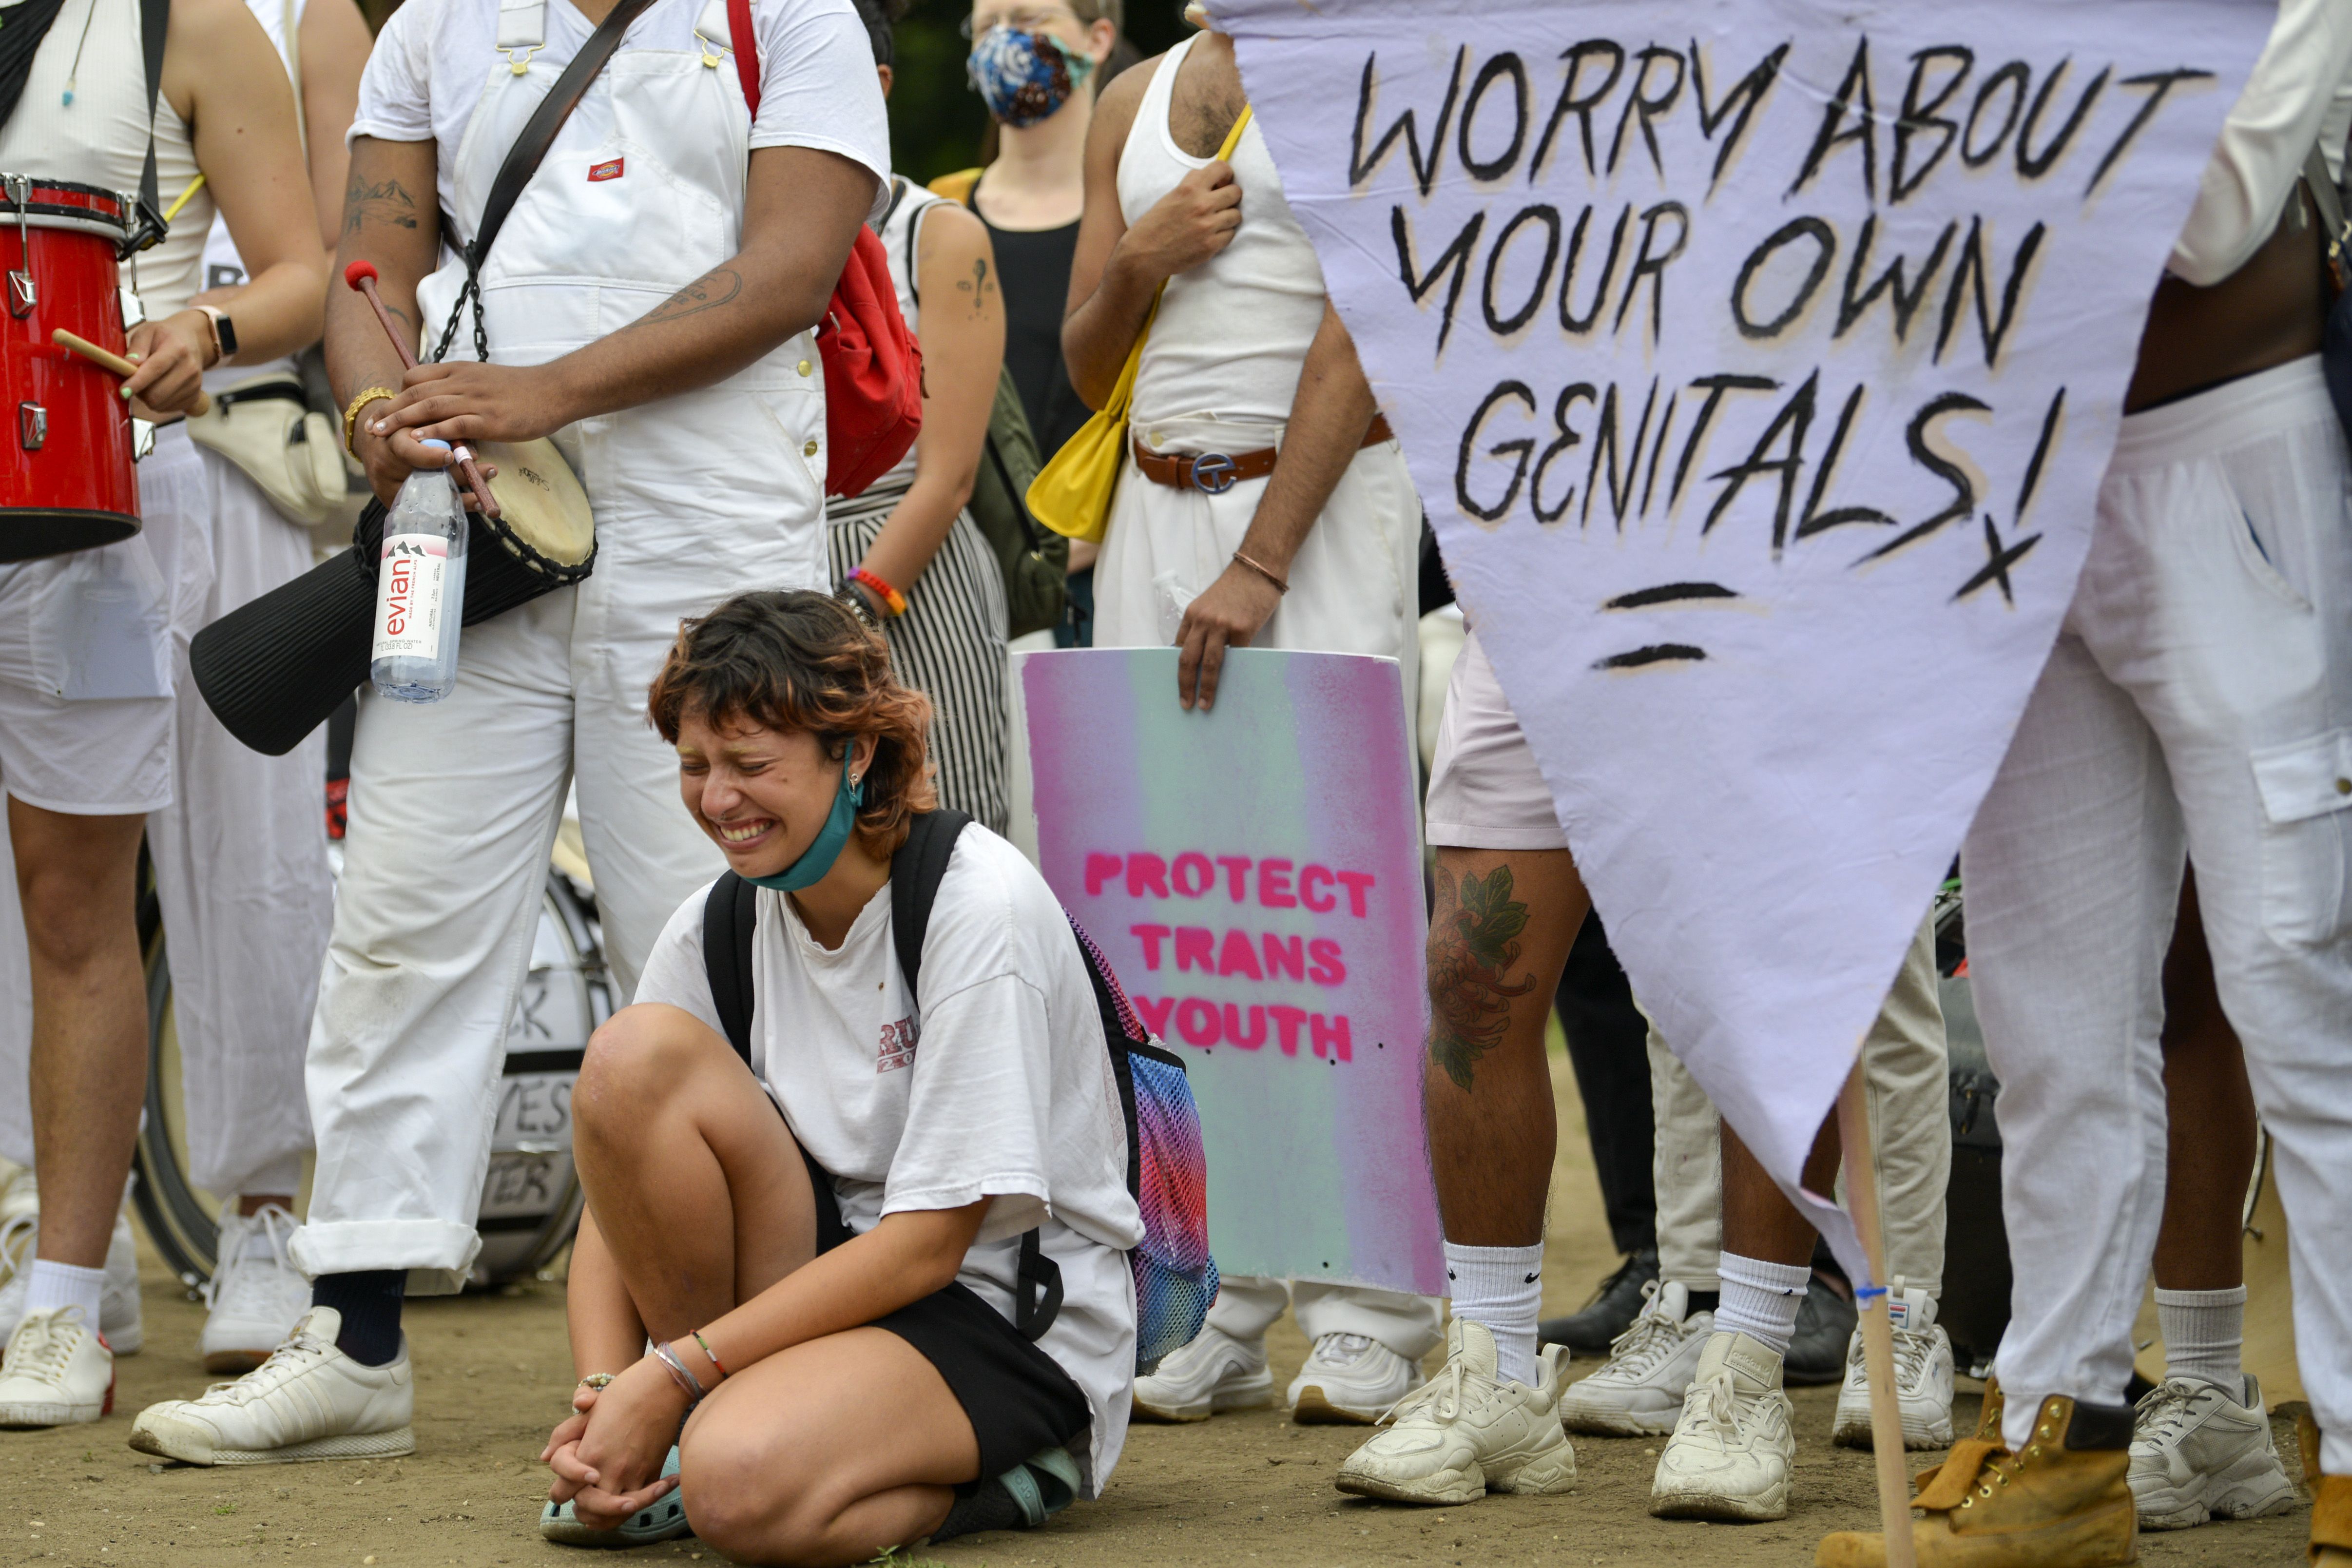 Photo of a person visibly emotional and kneeling on the ground with protesters holding signs behind them, one says "Worry about your own genitals"